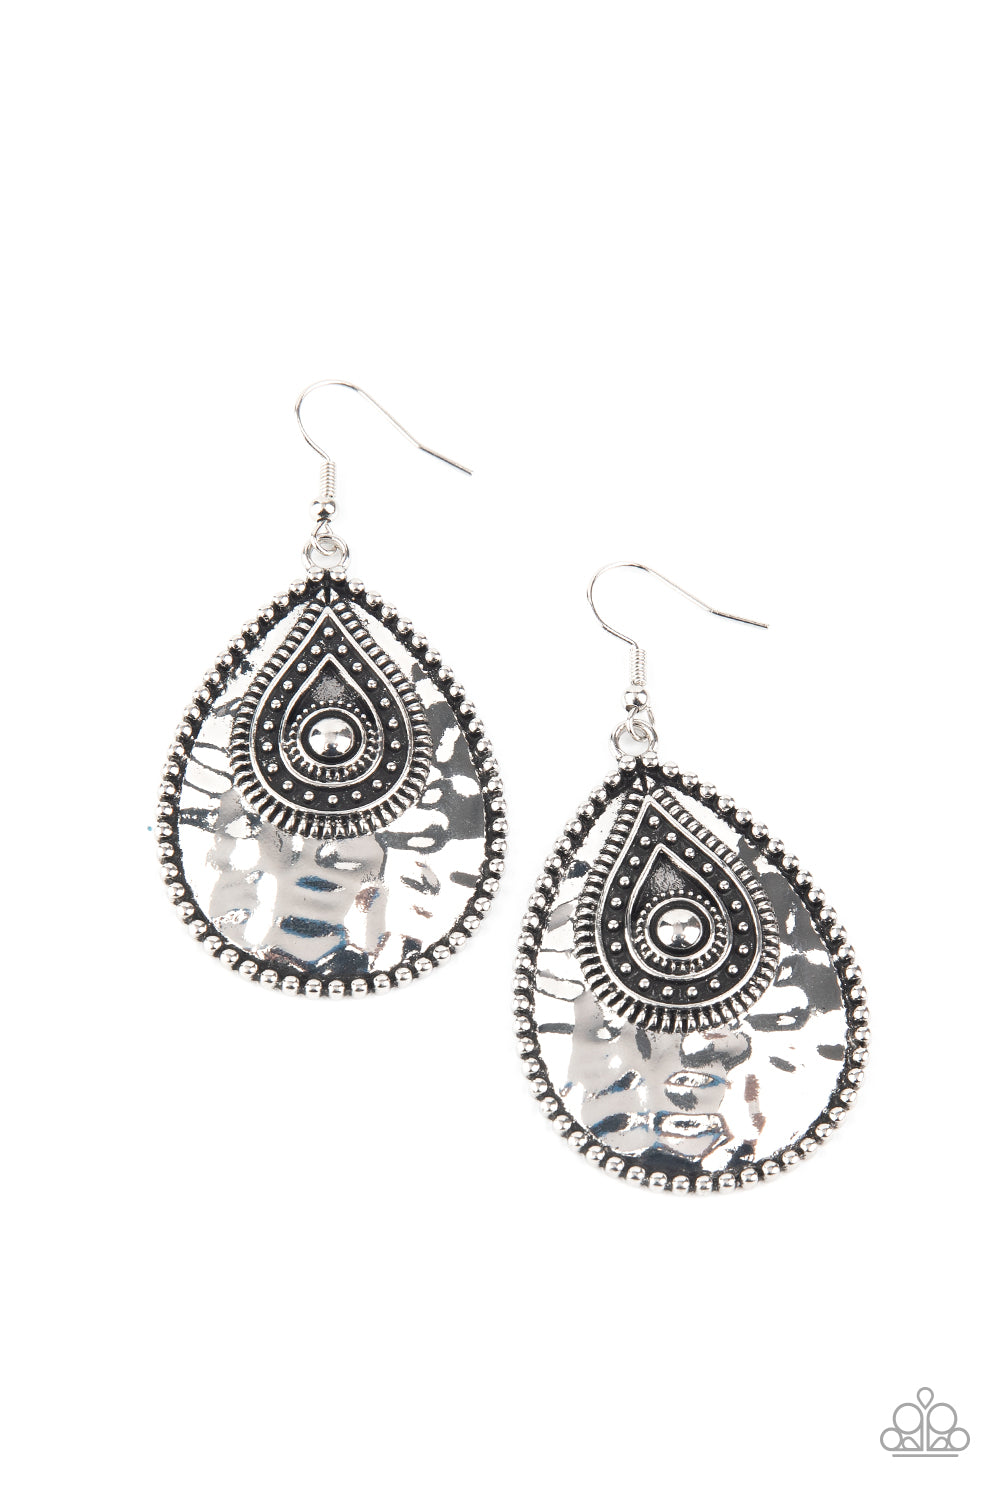 &lt;P&gt;Bordered in antiqued studs, a hammered silver teardrop is embellished with matching rustic details for a handcrafted finish. Earring attaches to a standard fishhook fitting.&lt;/P&gt;  

&lt;P&gt; &lt;I&gt;  Sold as one pair of earrings. &lt;/I&gt;  &lt;/P&gt;


&lt;img src=\&quot;https://d9b54x484lq62.cloudfront.net/paparazzi/shopping/images/517_tag150x115_1.png\&quot; alt=\&quot;New Kit\&quot; align=\&quot;middle\&quot; height=\&quot;50\&quot; width=\&quot;50\&quot;/&gt;